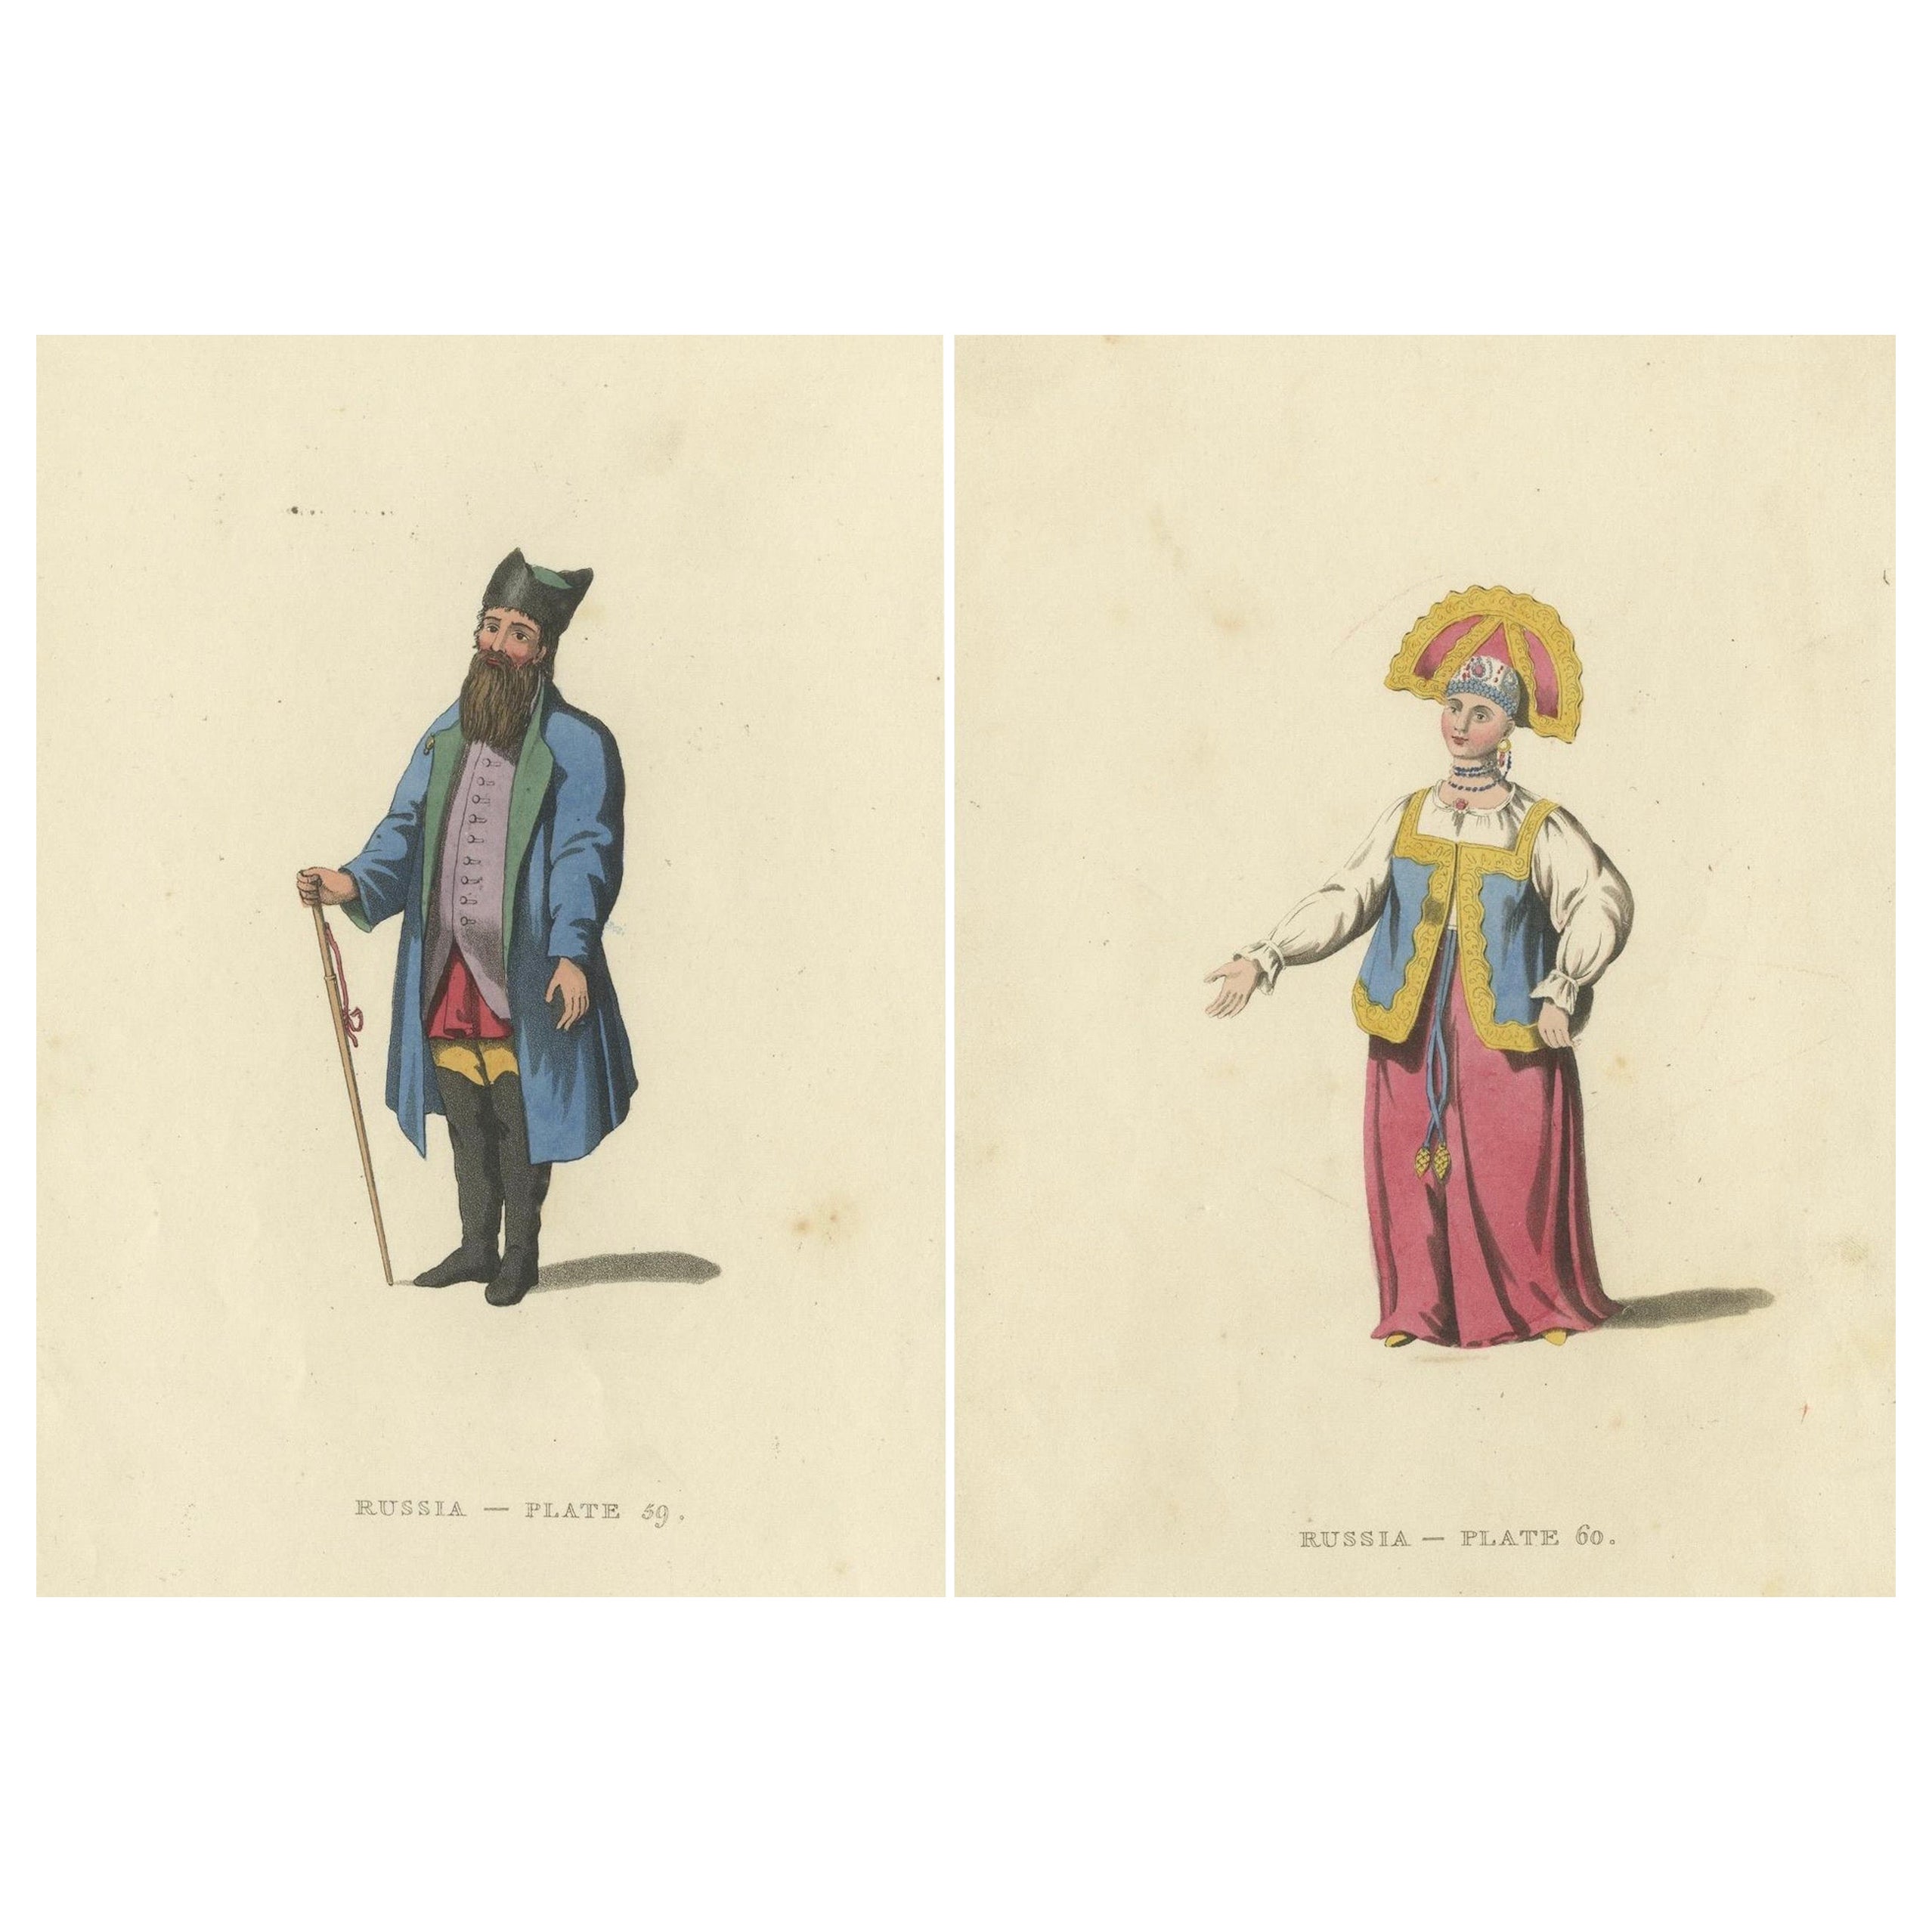 Sartorial Elegance of Kaluga: A Merchant and a Woman in Traditional Attire, 1814